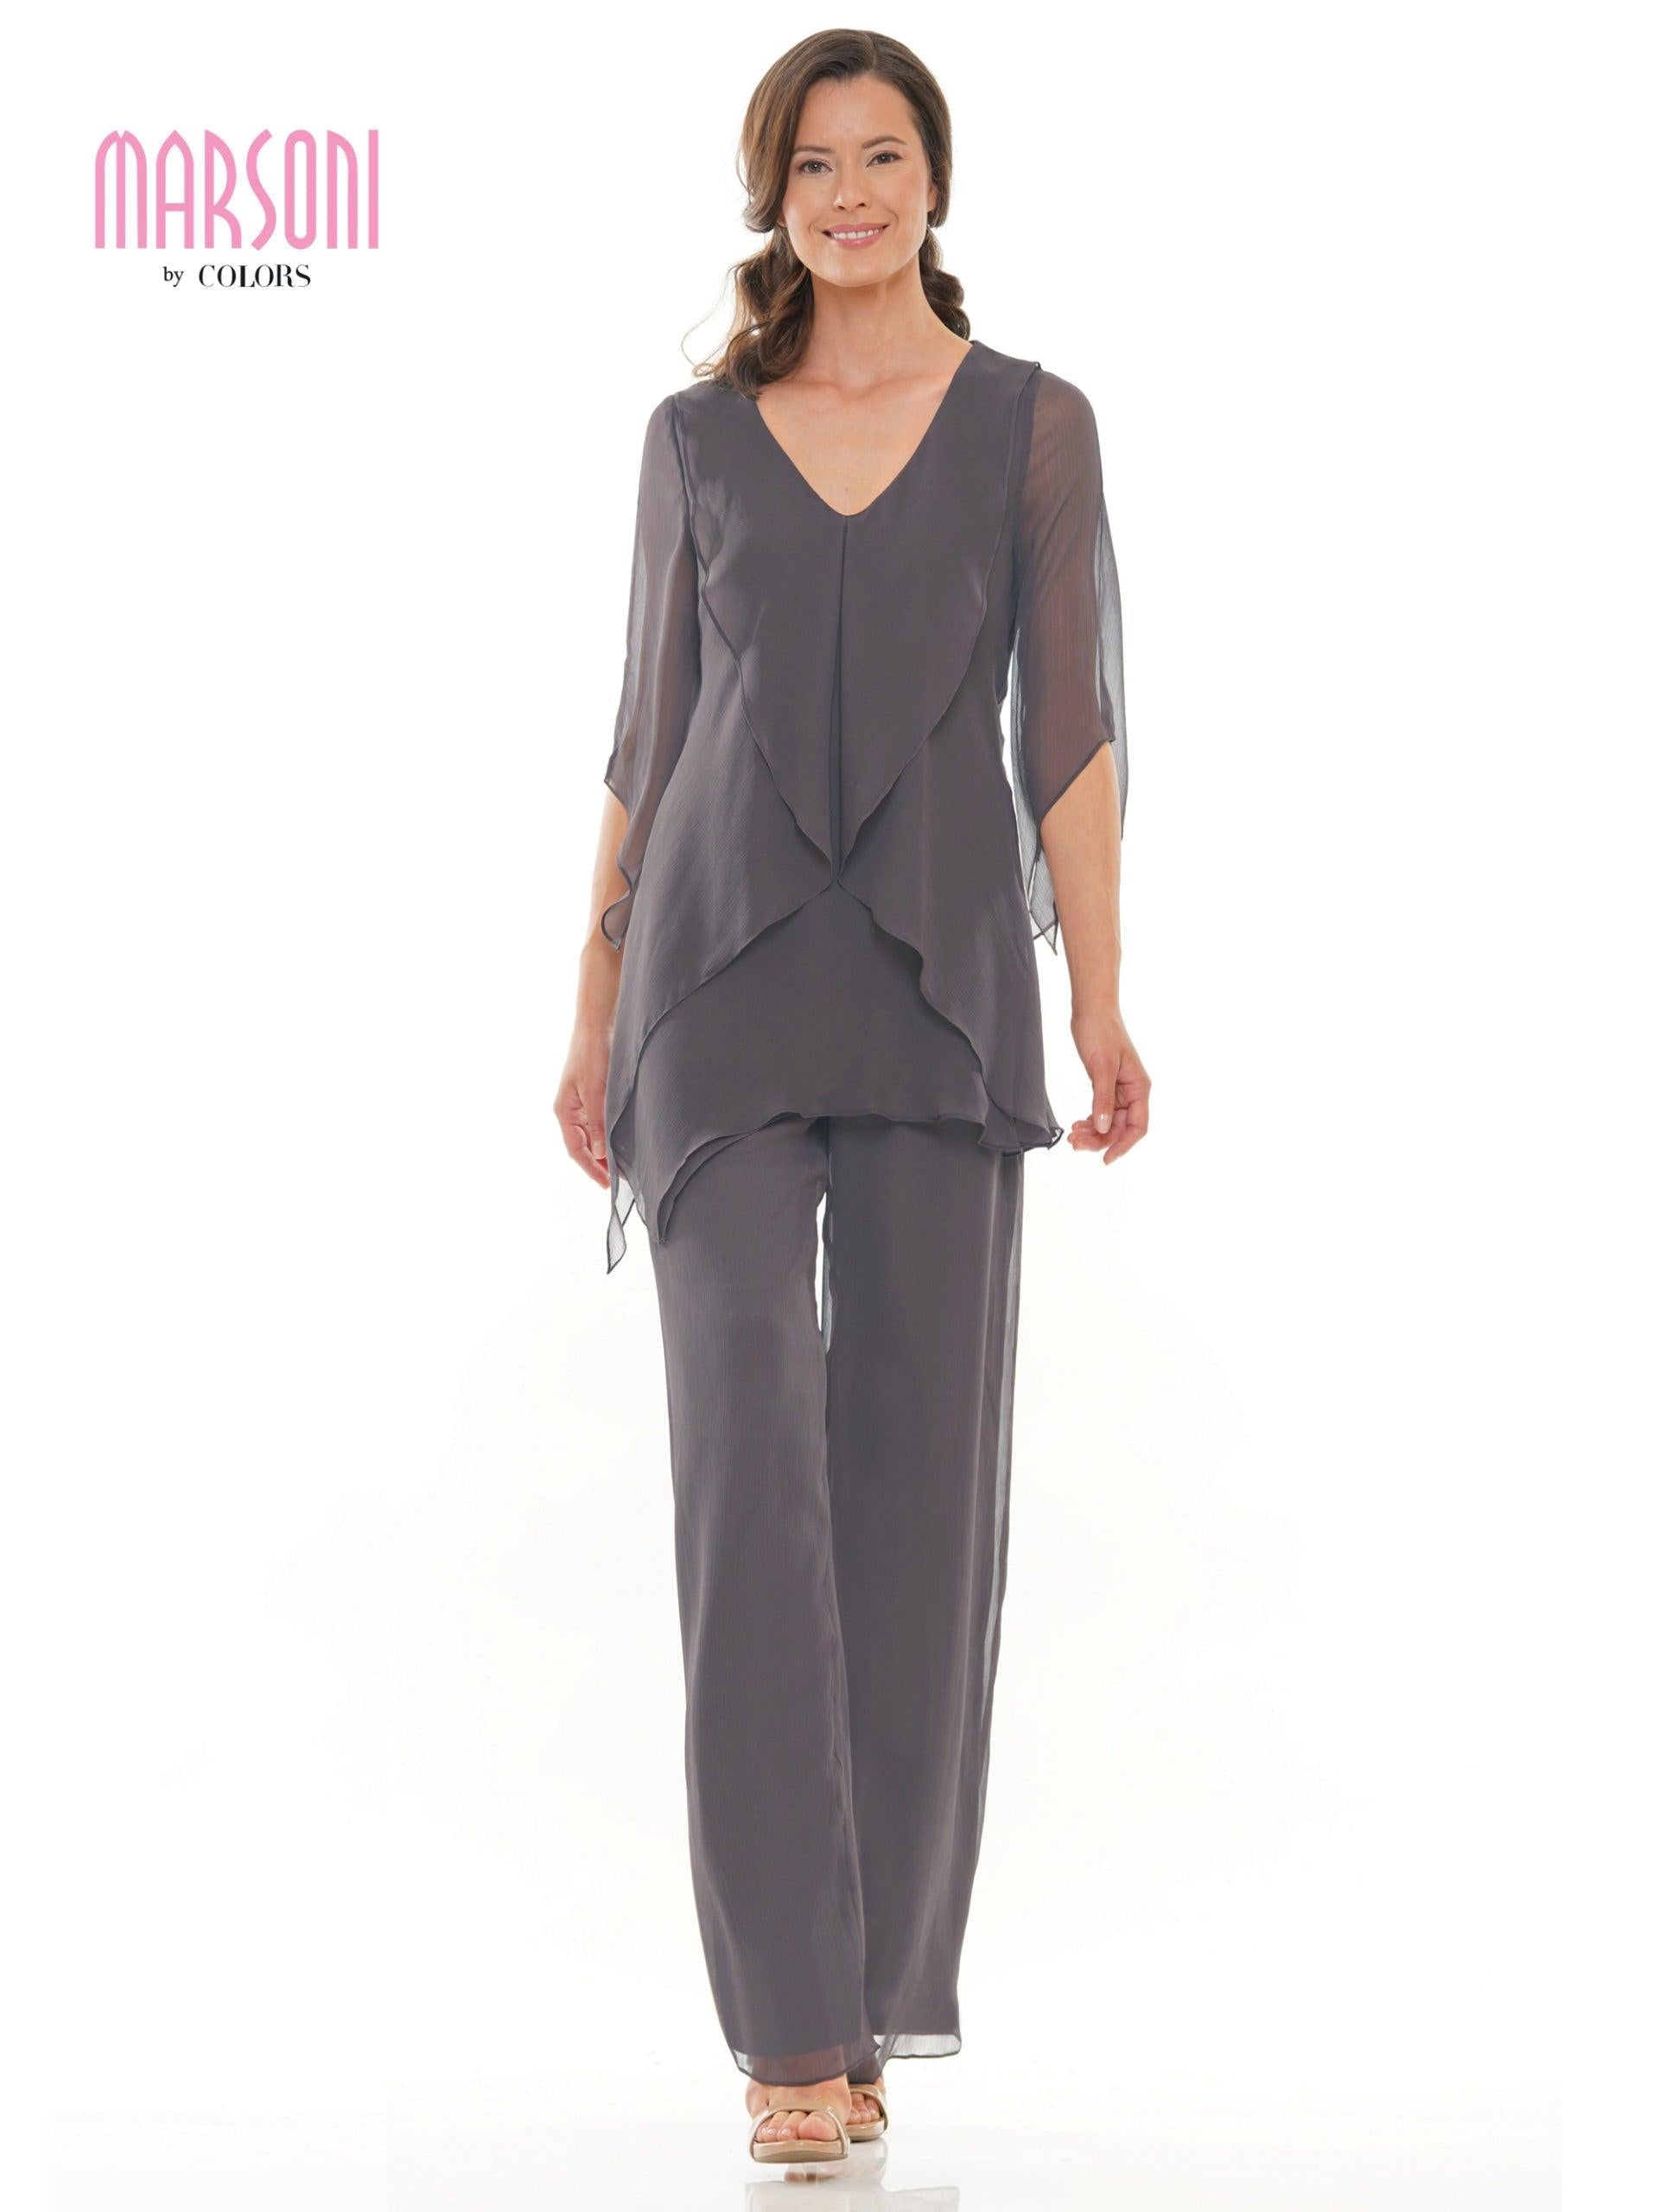 Navy Marsoni Formal Mother of the Bride Pant Suit 308 for $259.99